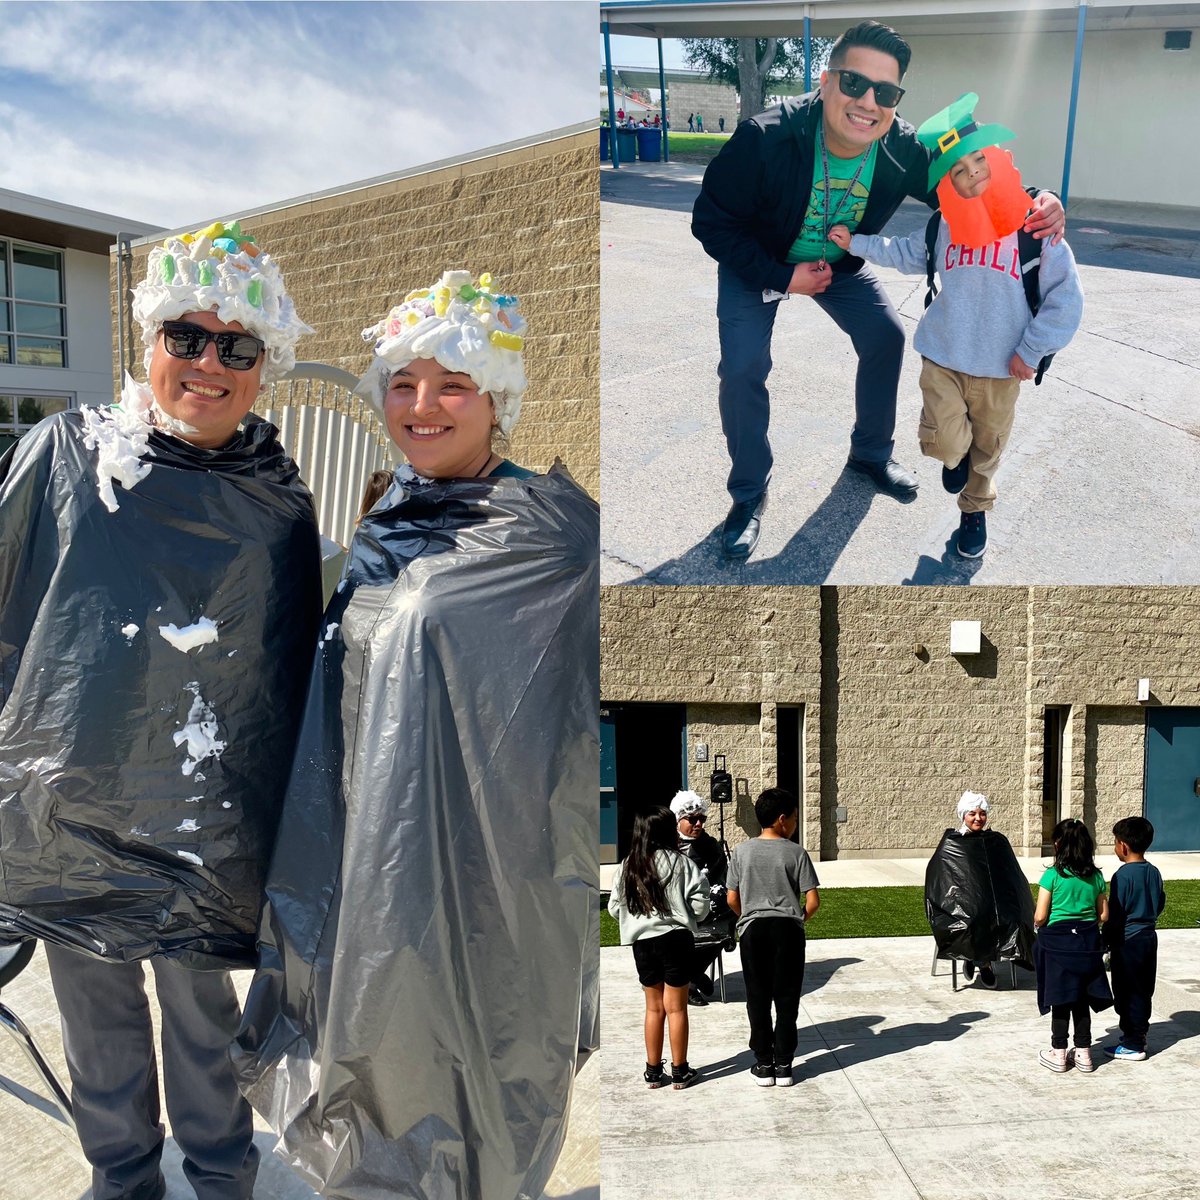 Our St. Patrick's Day consisted of some Fun Friday shenanigans with #JeffersonJaguars ENGAGE 360 students. Our #SAUSD students are our lucky charms. 🌈🍀 #WeAreSAUSD #ExpandedLearning